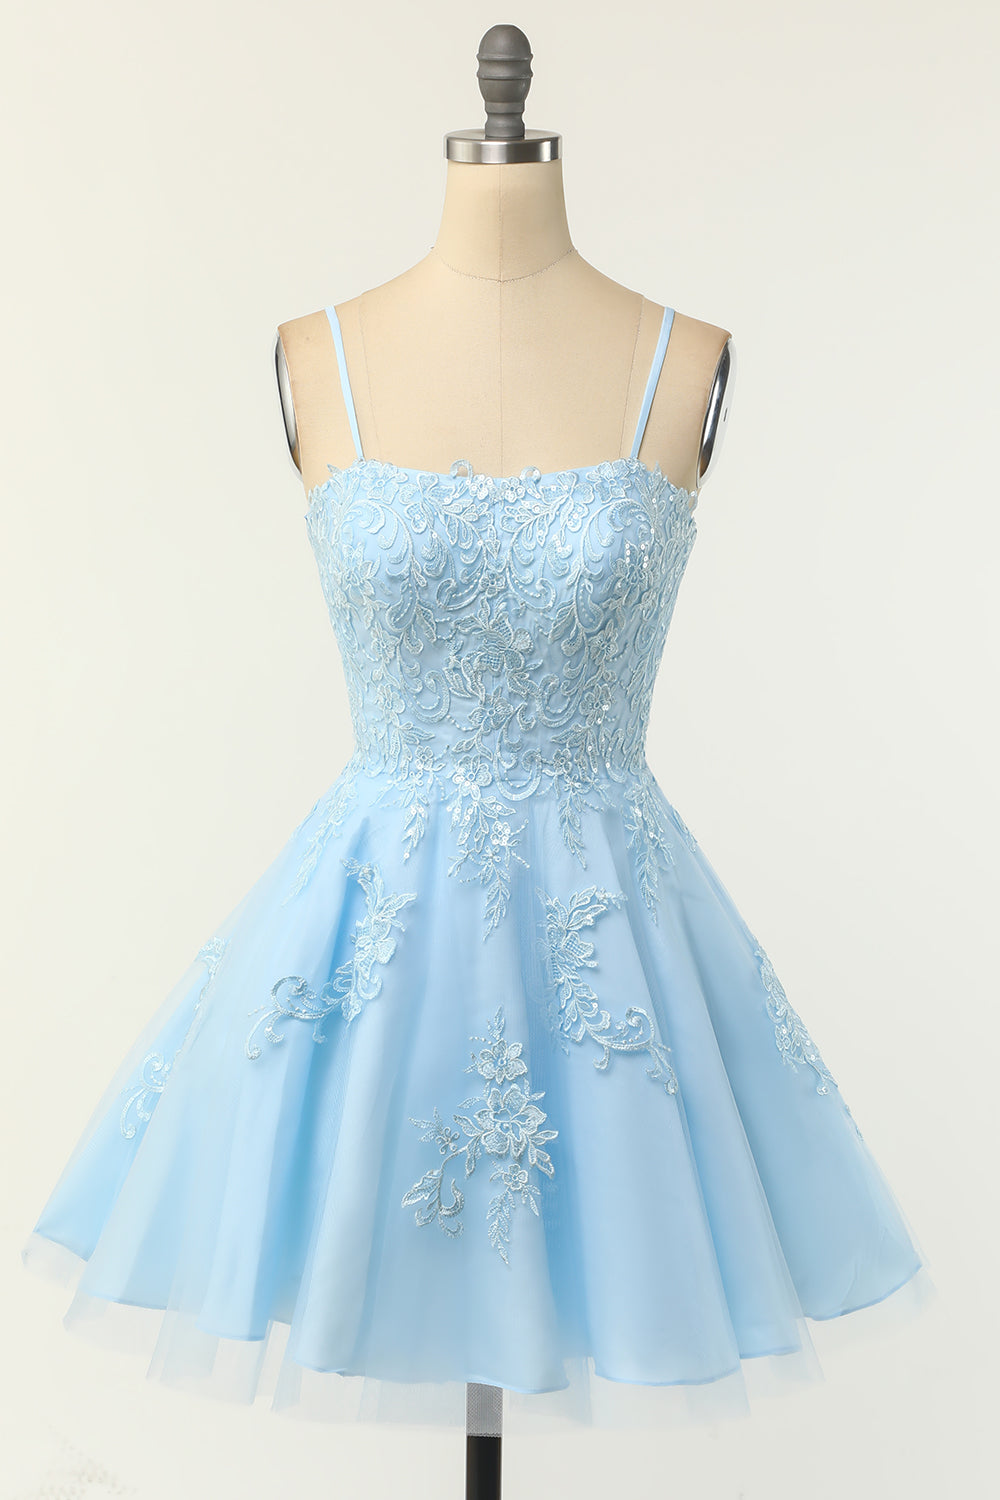 Light Blue Appliques A-Line Short Homecoming Dress with Spaghetti Straps